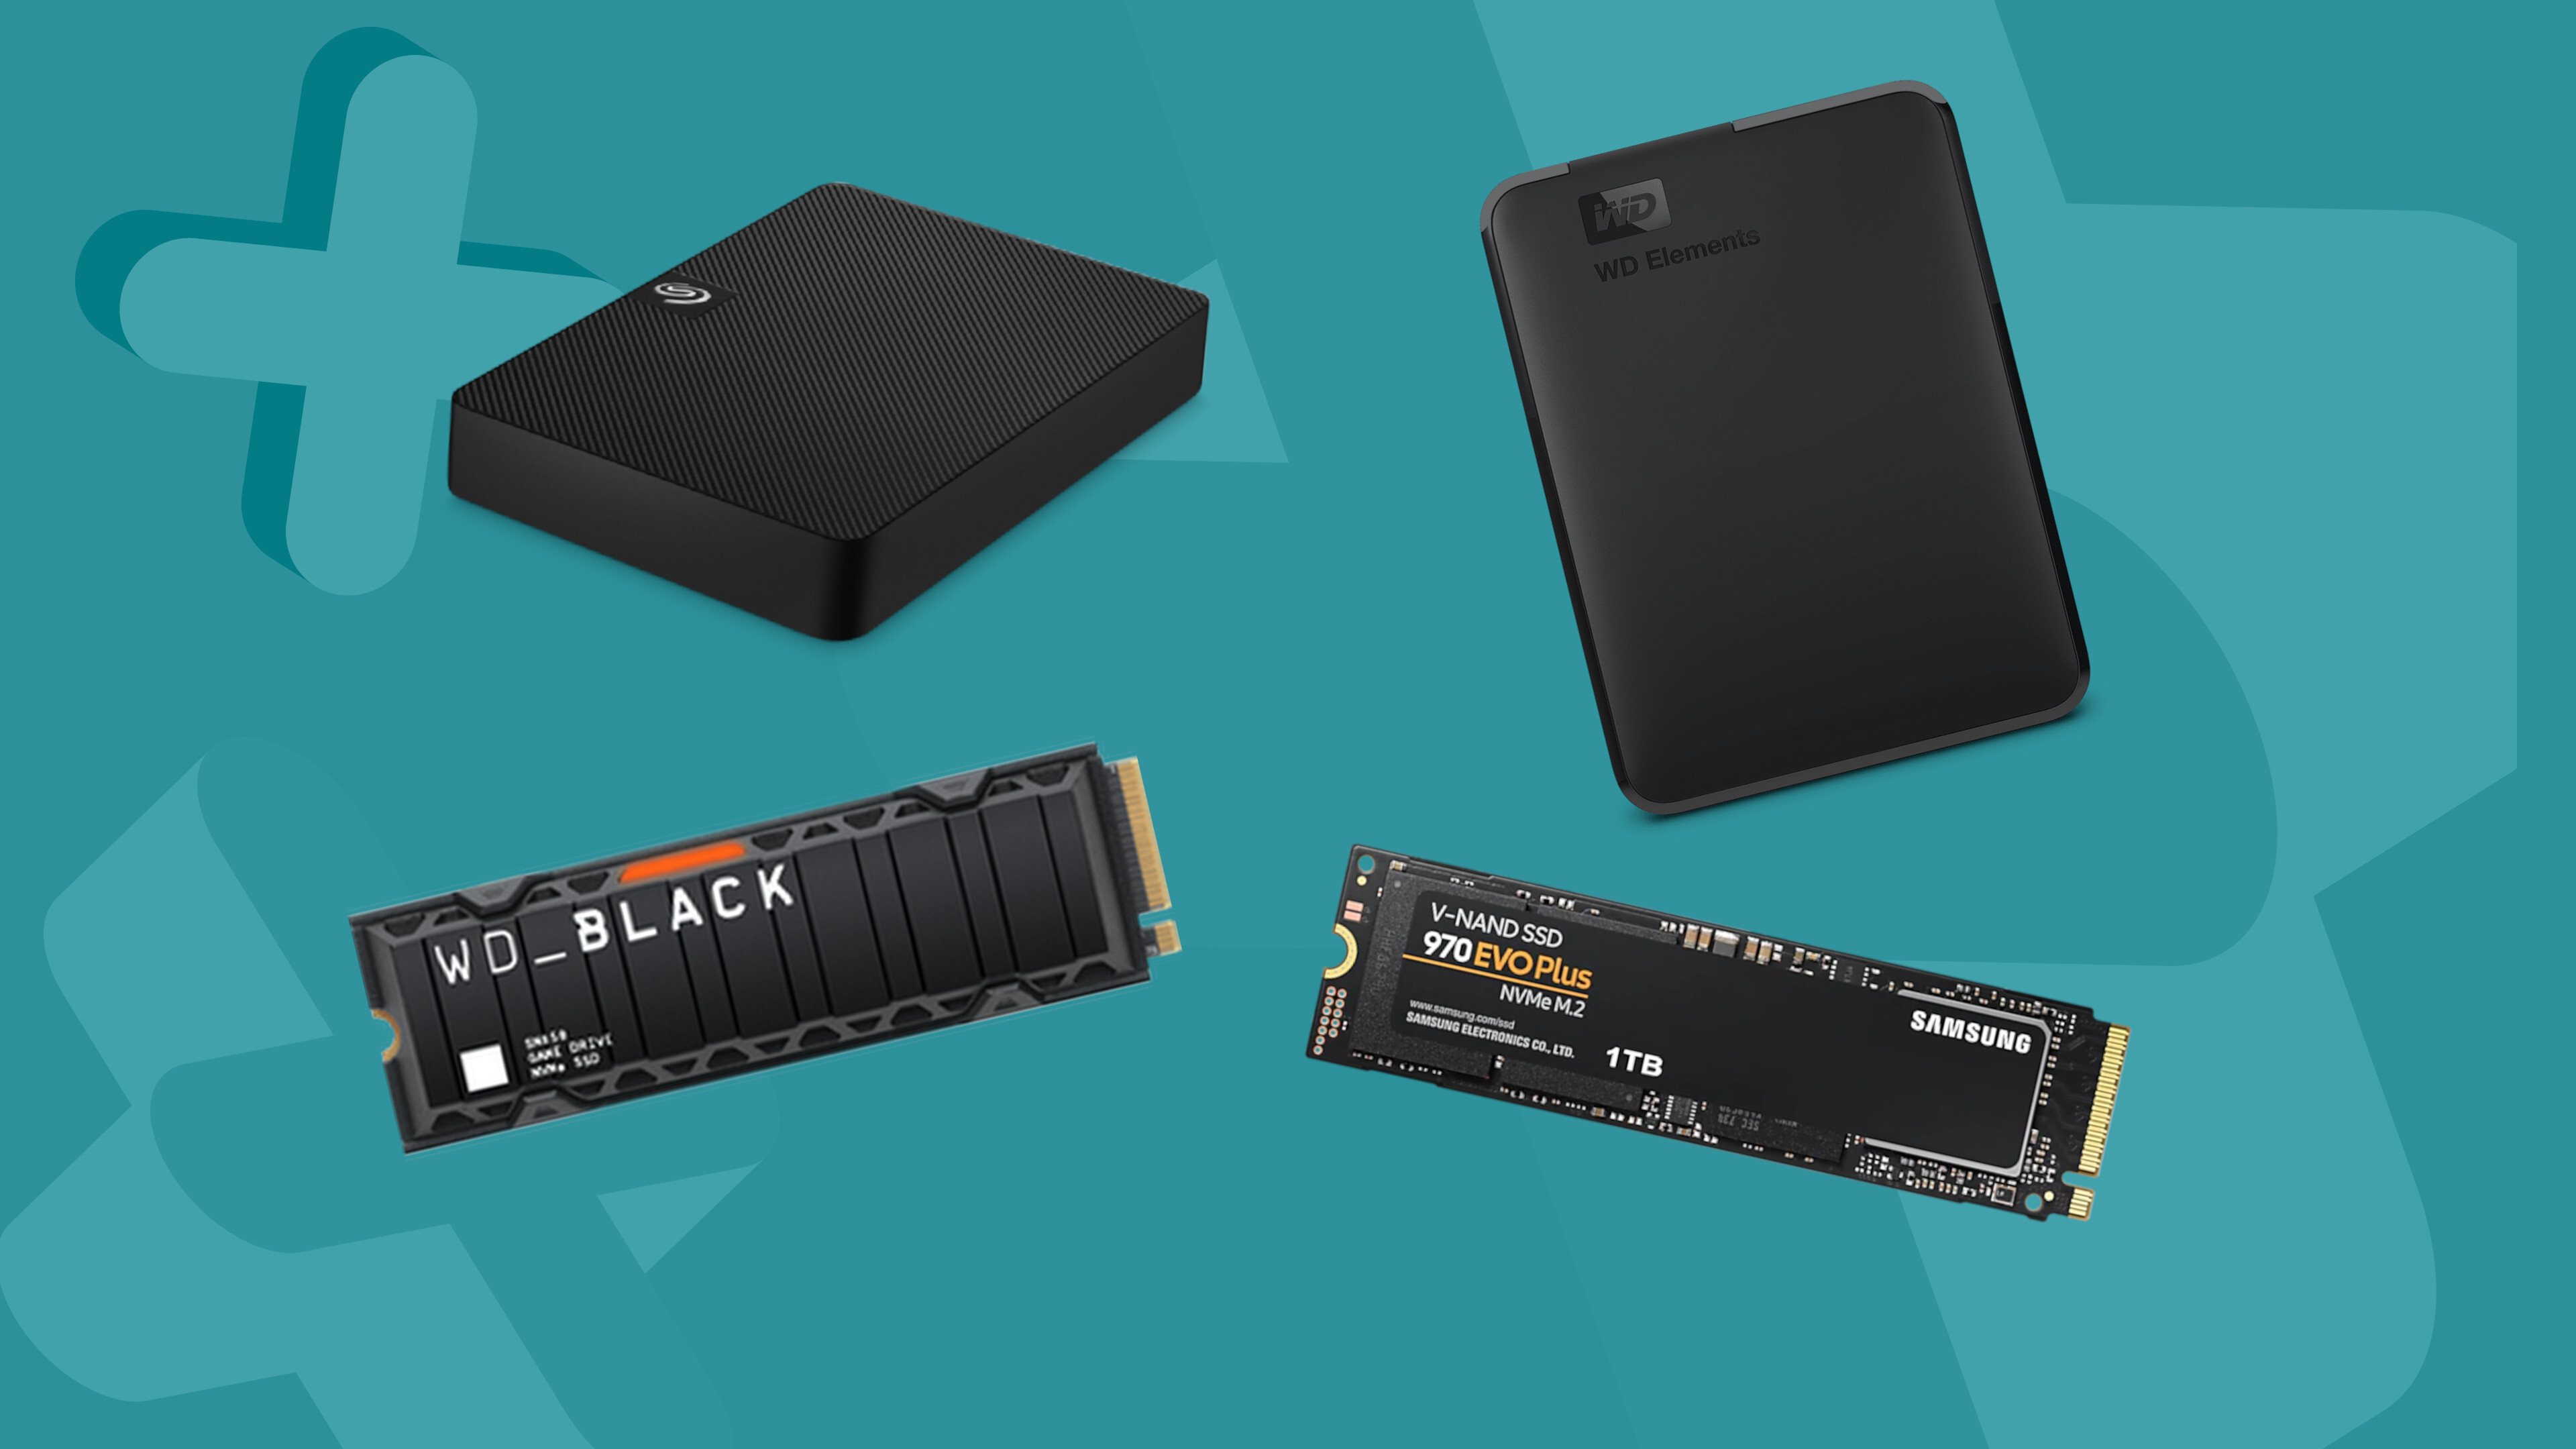 Daily Deals: Save on the Best PS5 SSD Storage Upgrades from